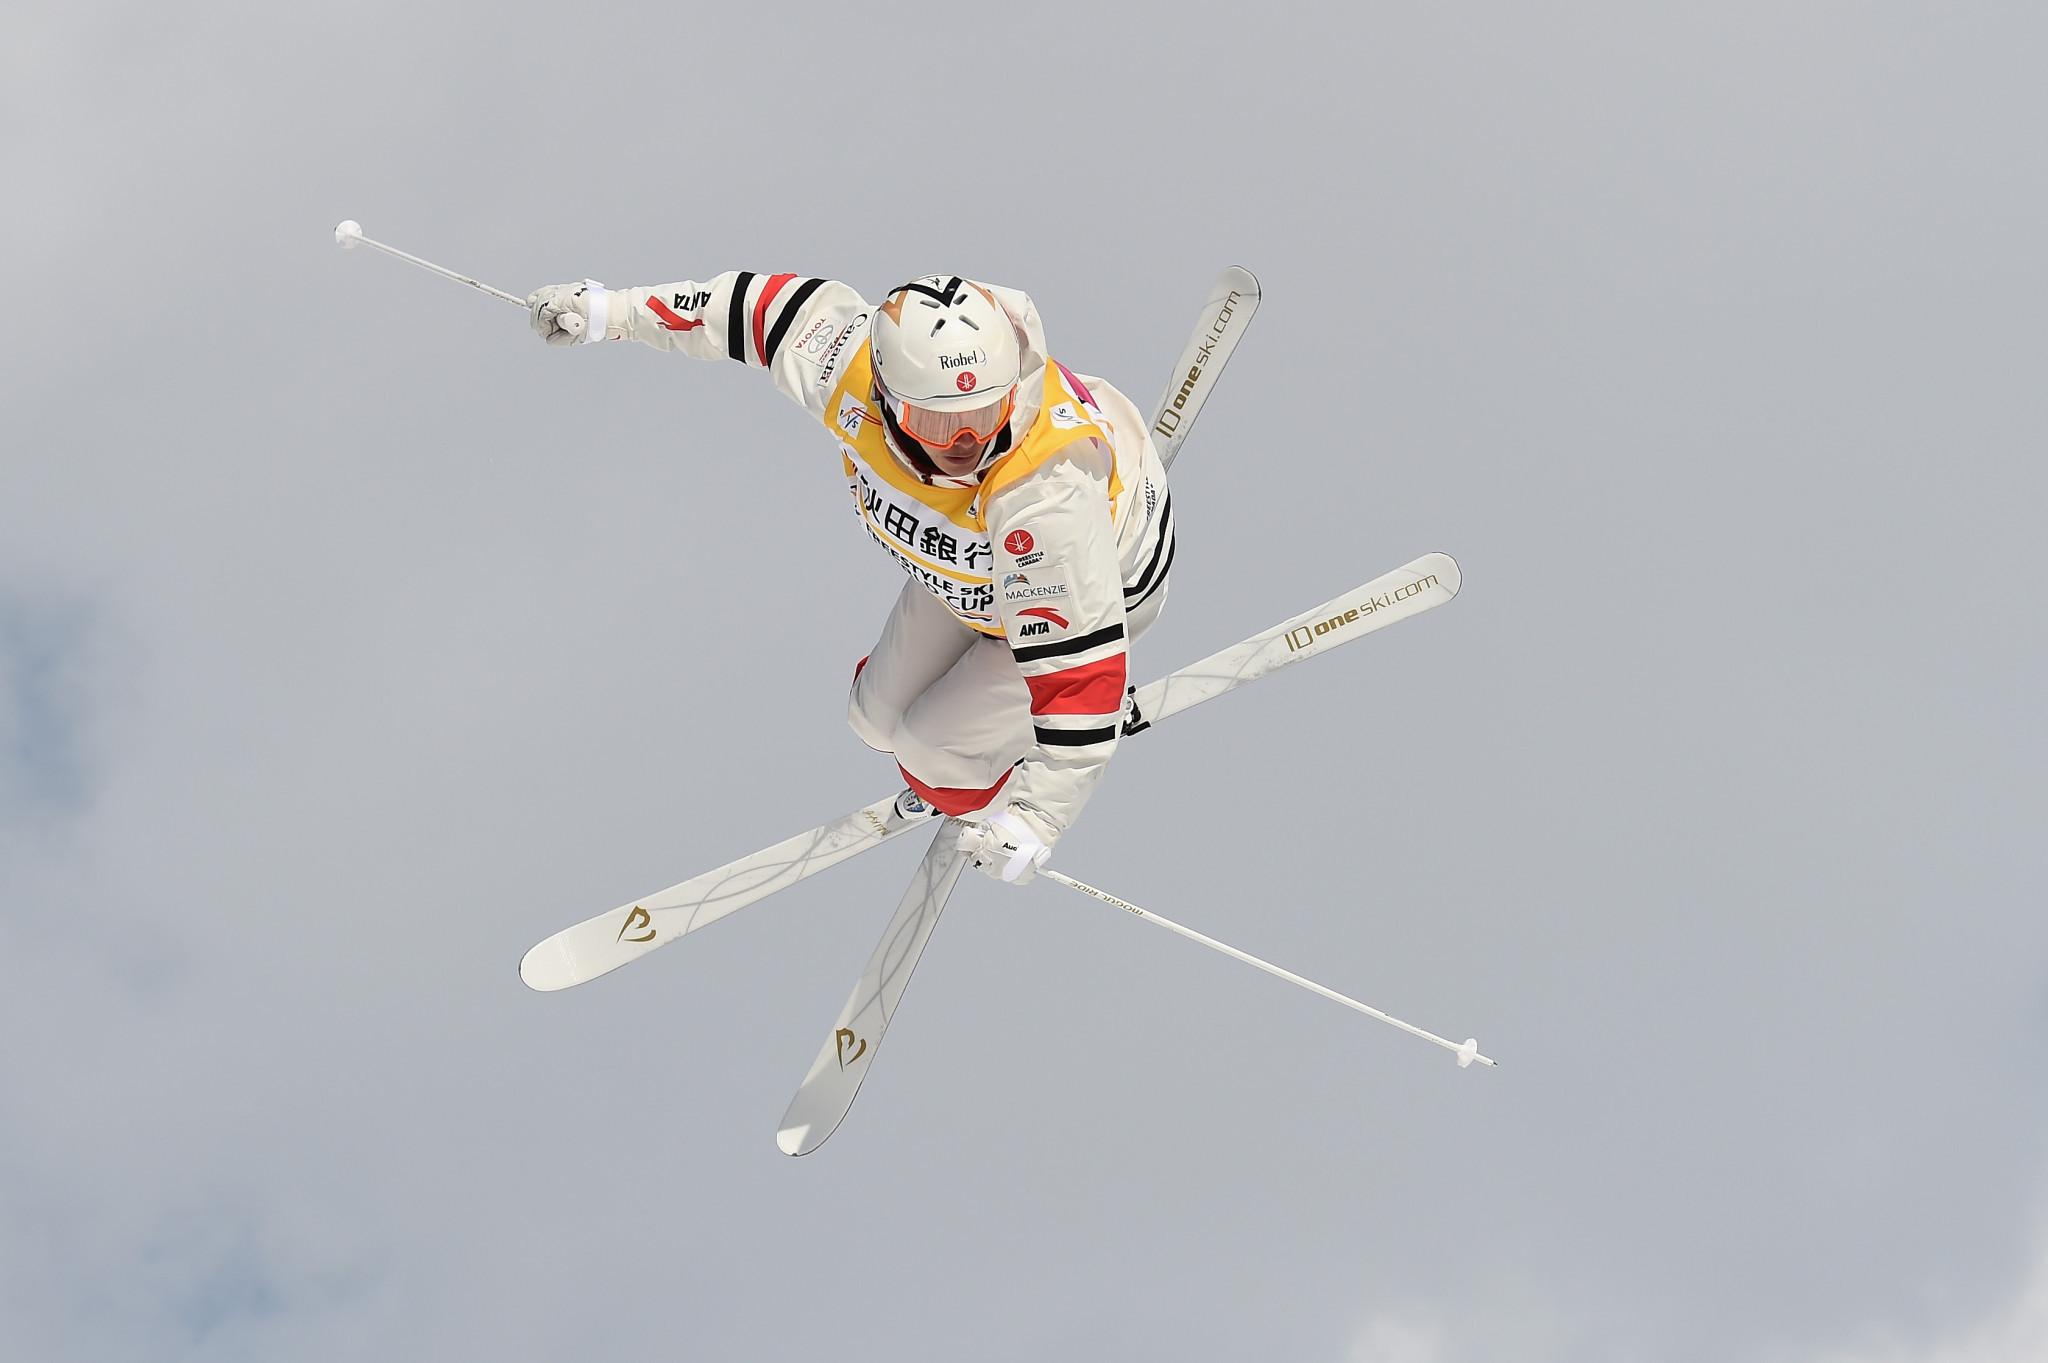 Kingsbury and Laffont extend Moguls World Cup leads with success in Japan